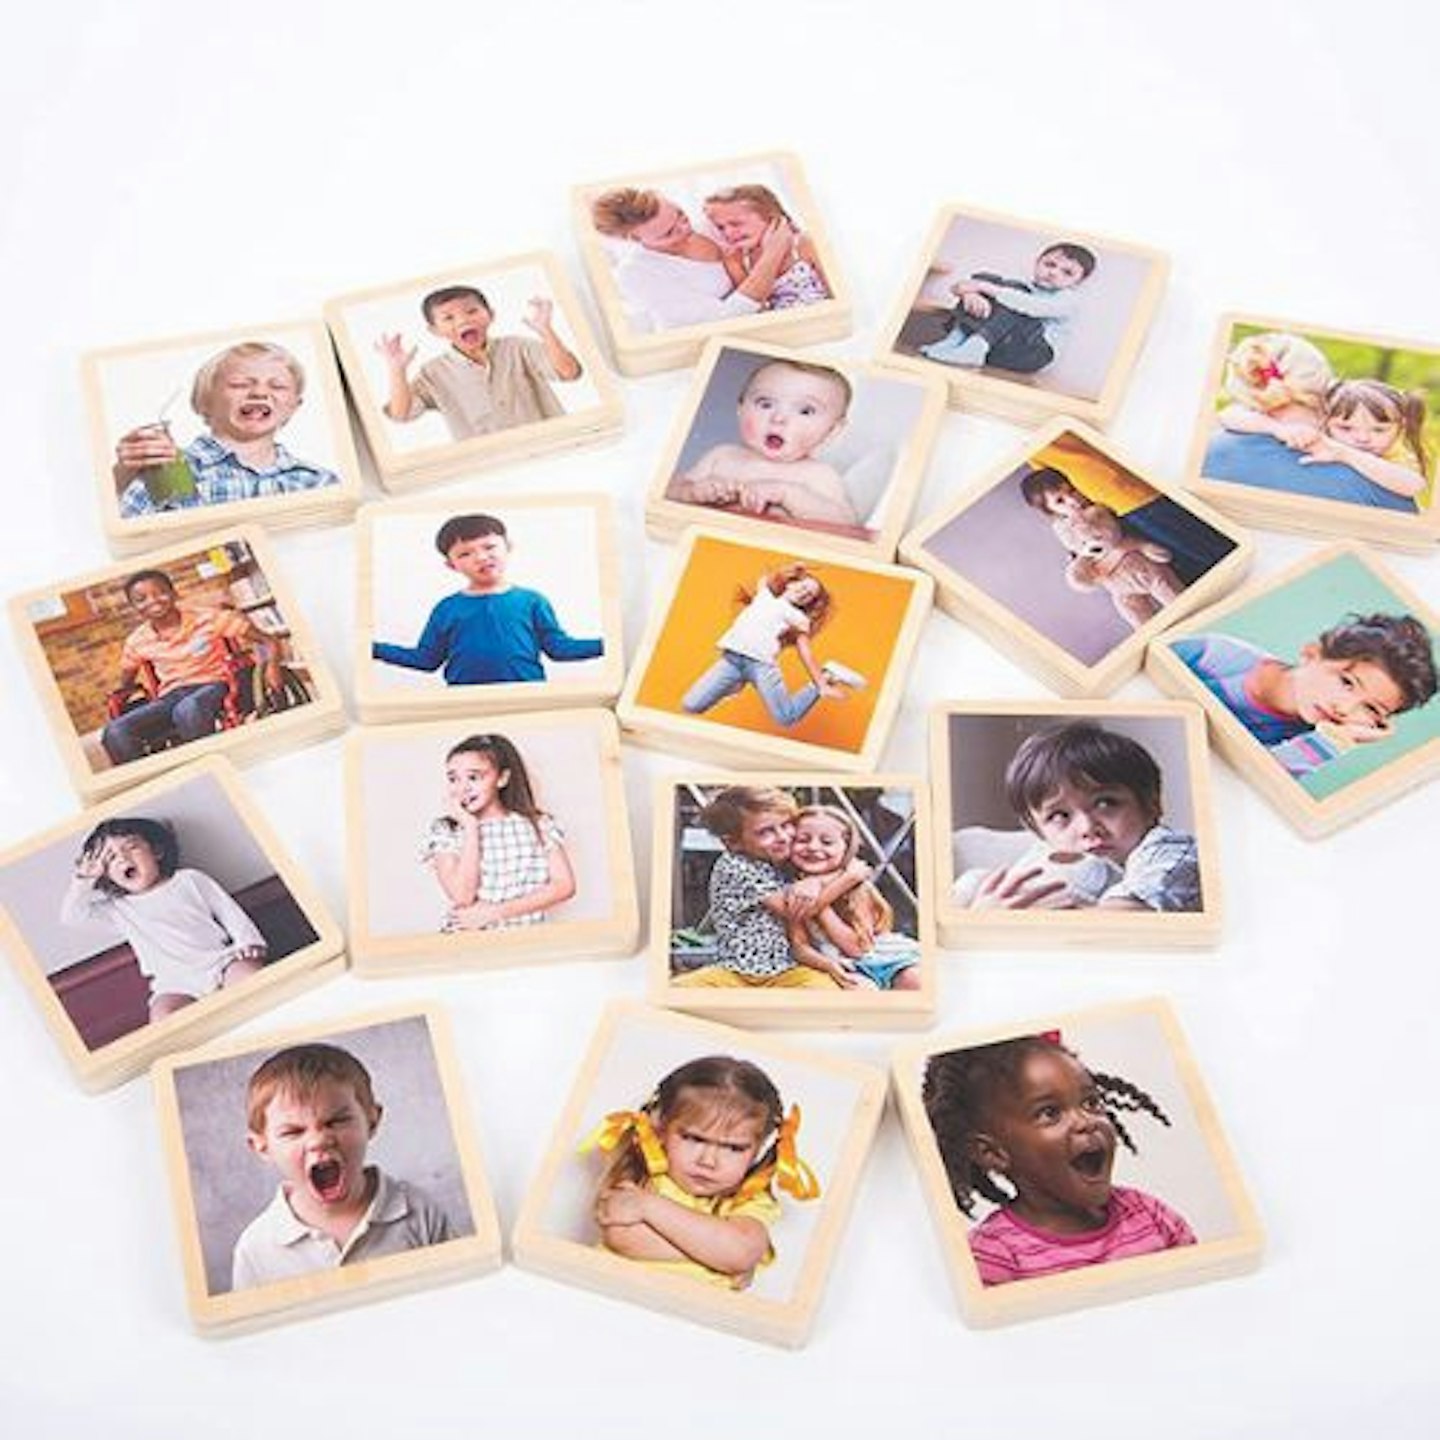 TickiT 73494 My Emotions Wooden Tiles set